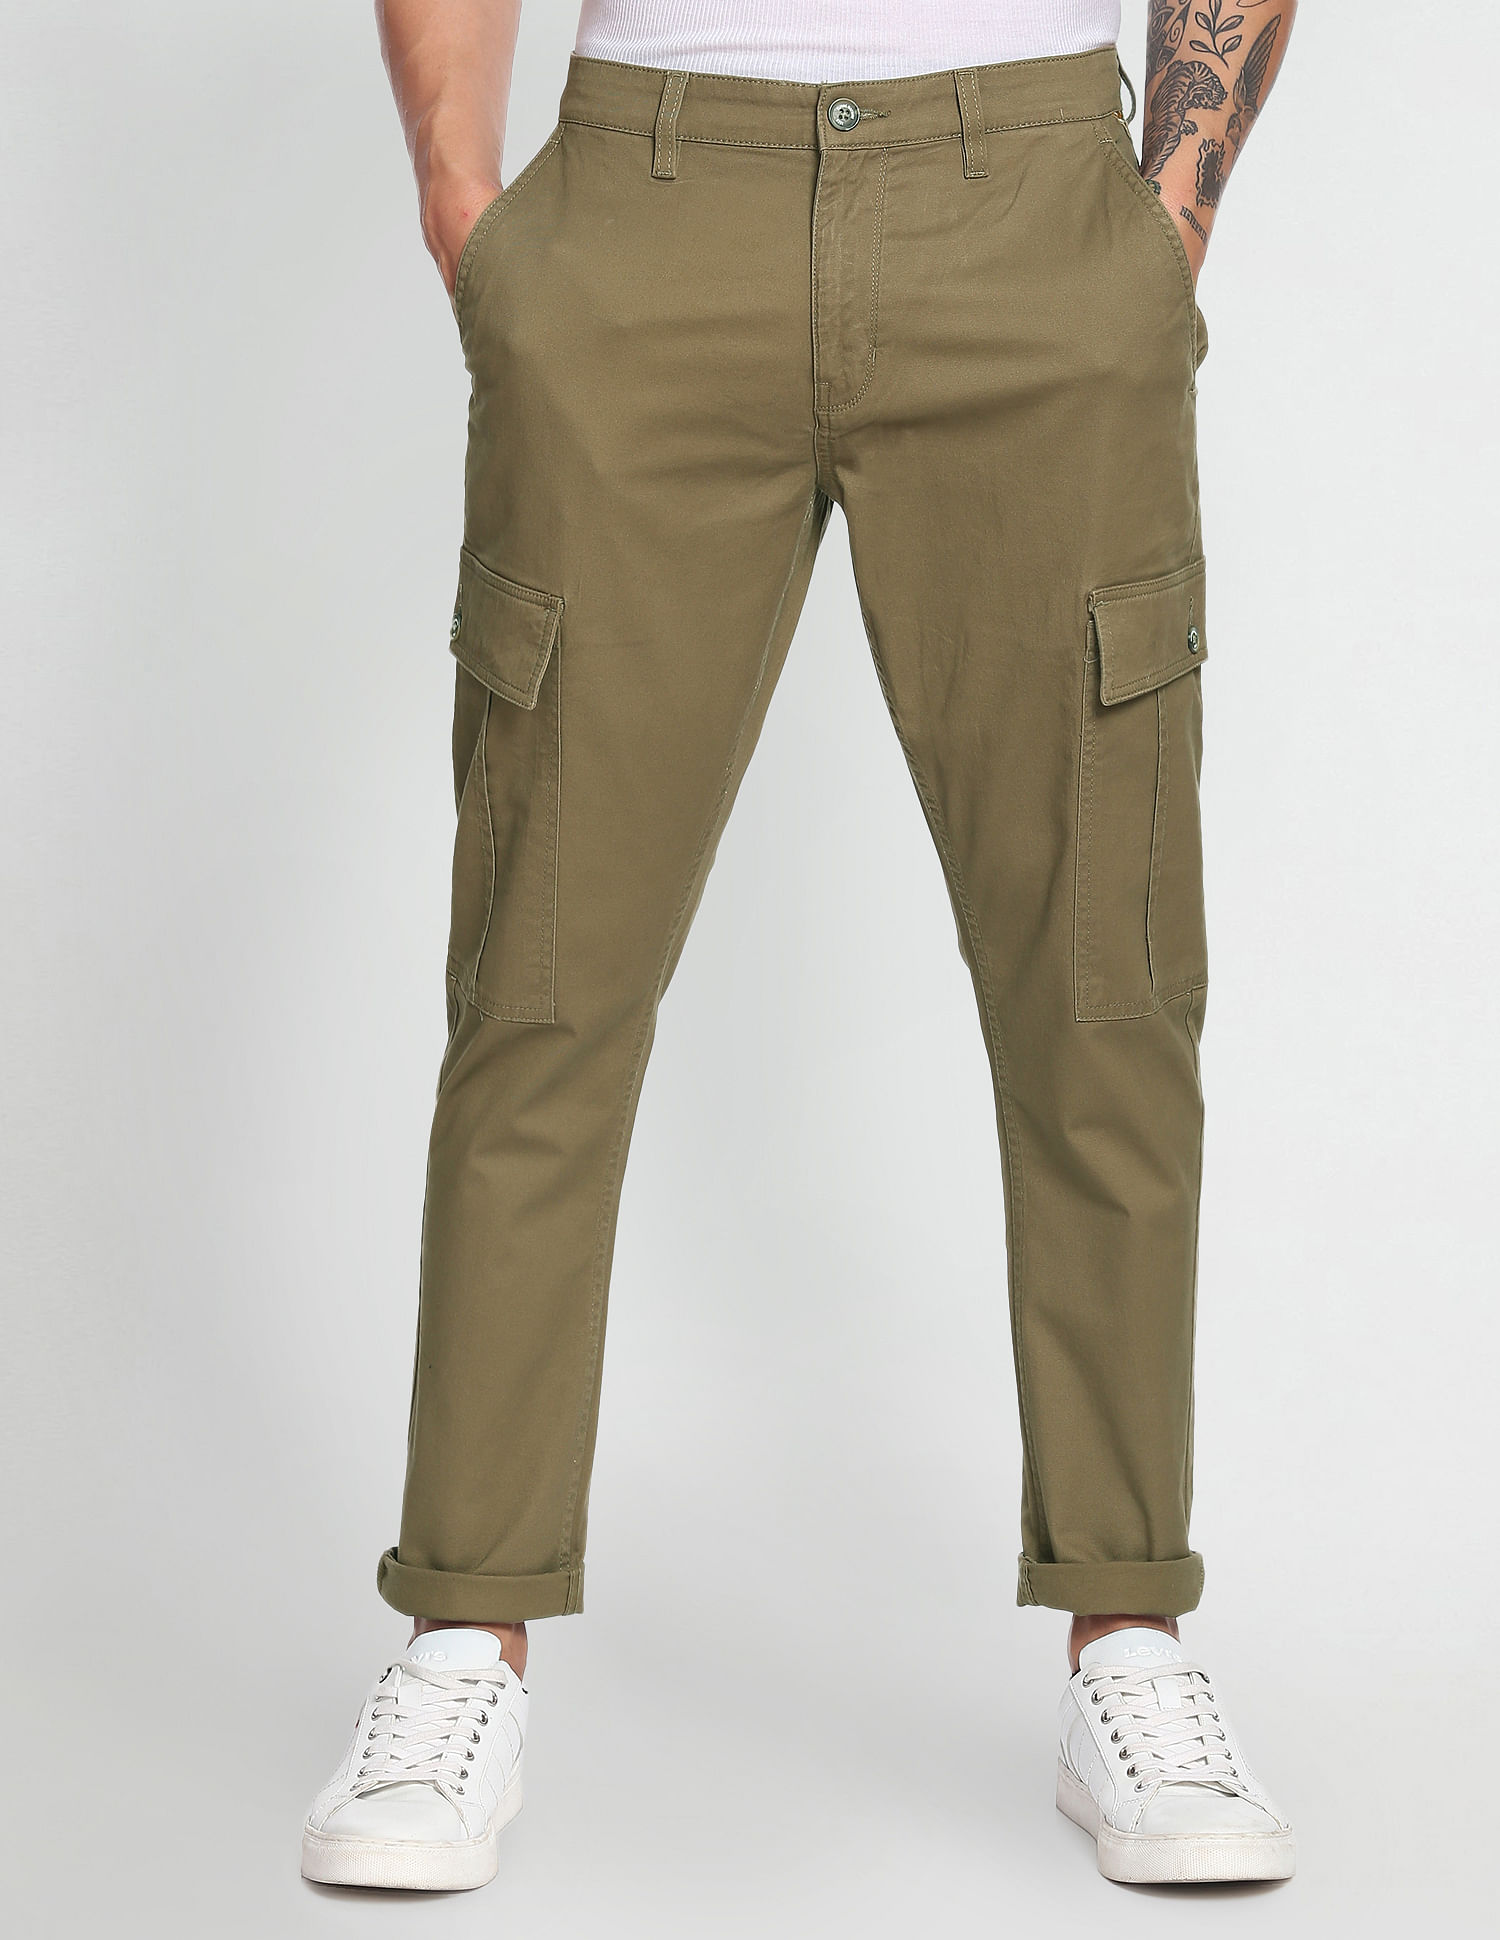 Buy 6 Pocket Cargo Pants For Men Online In India  Page 2